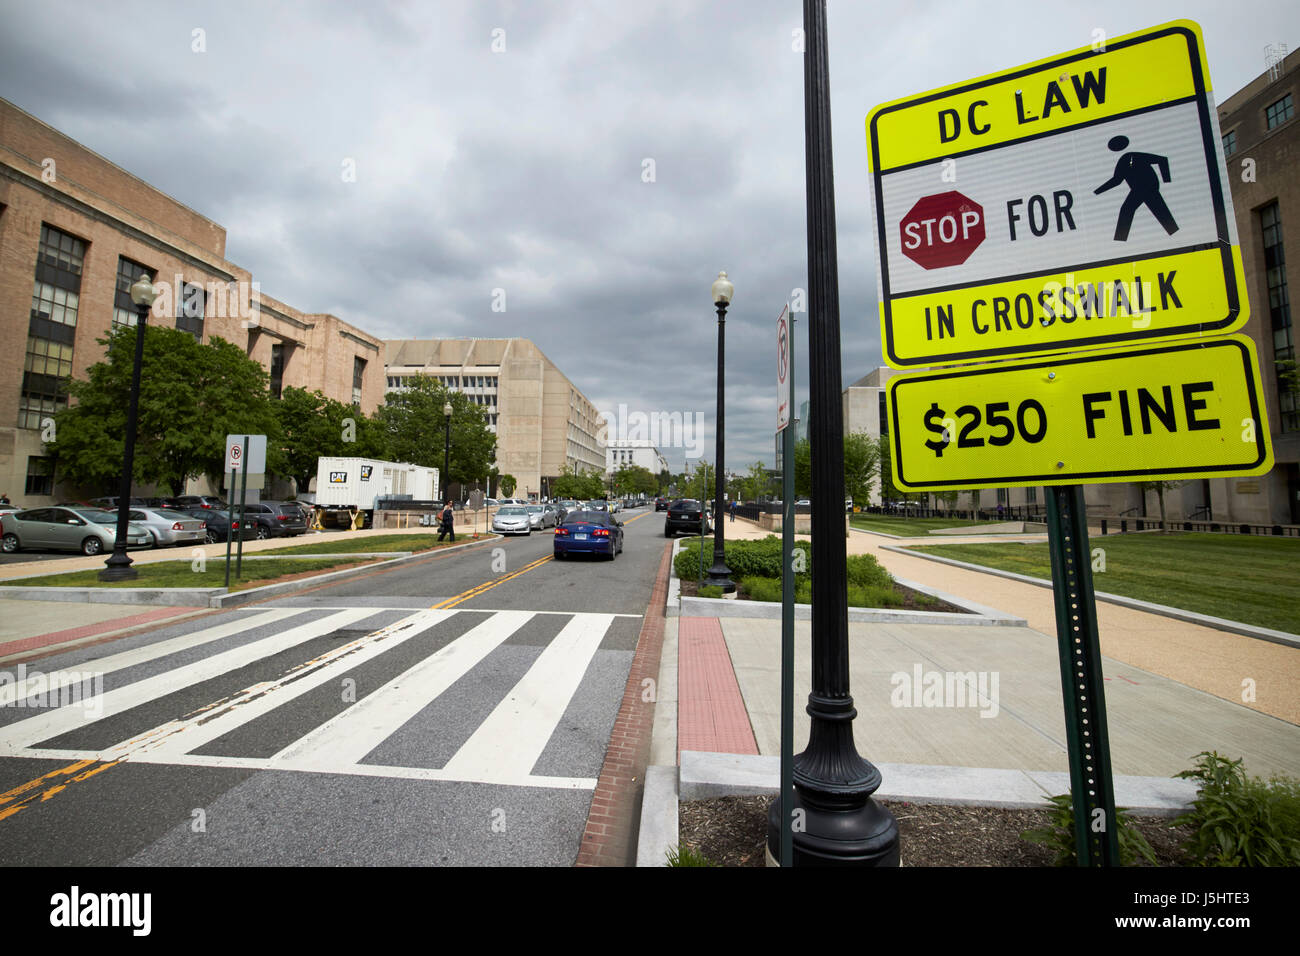 pedestrian crossing crosswalk with warning signs about 250 usd fine for not stopping Washington DC USA Stock Photo